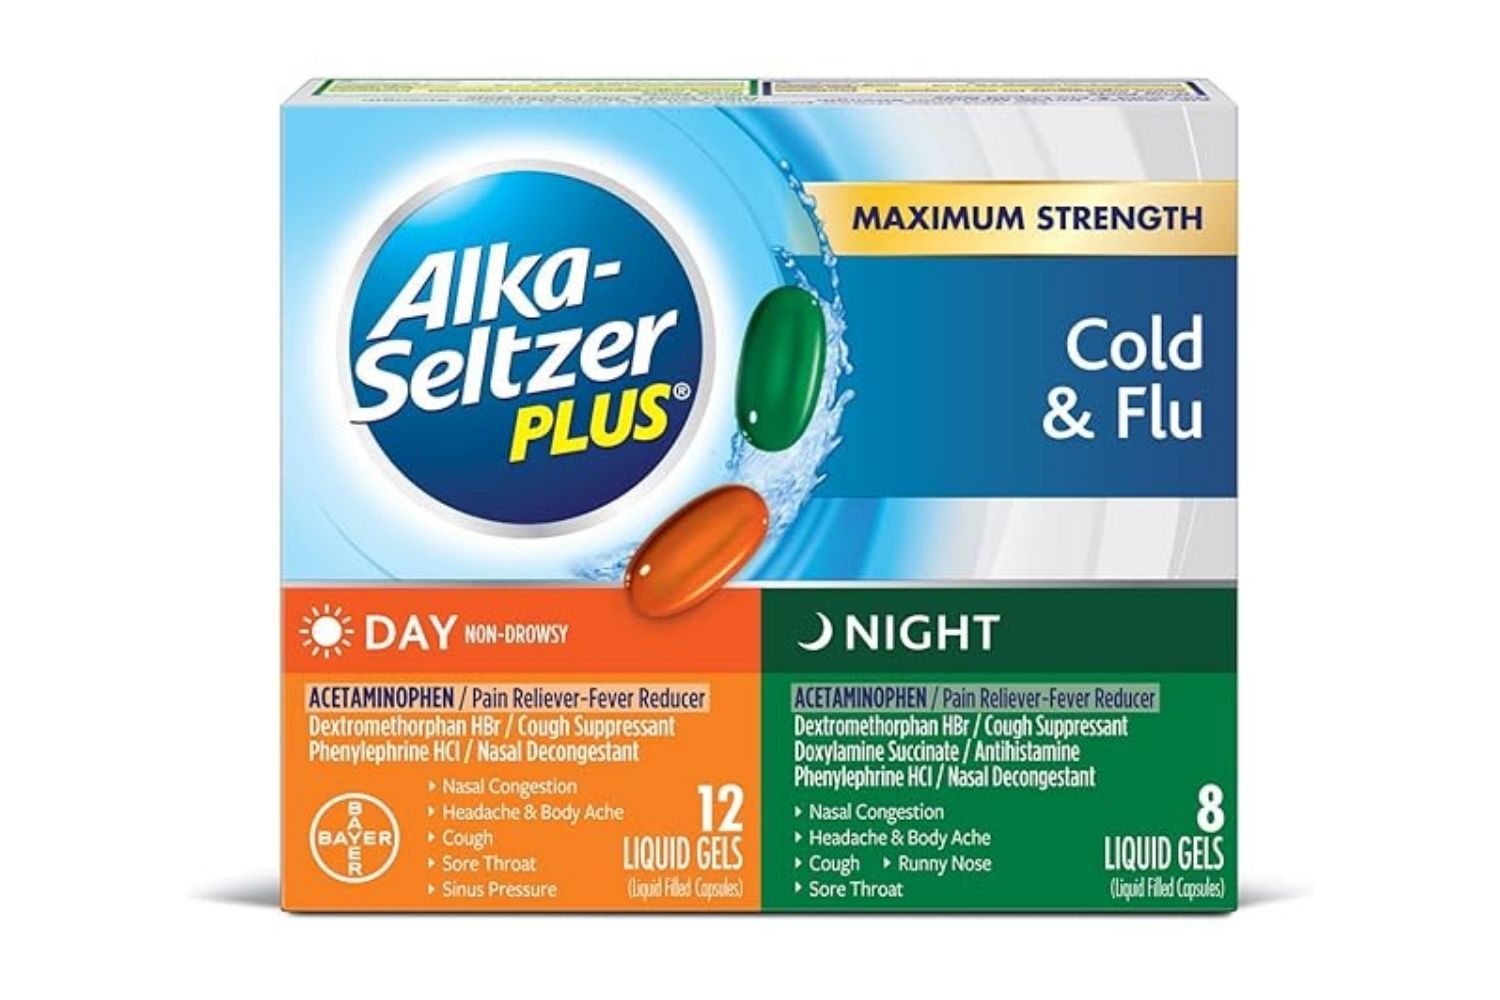 8-enigmatic-facts-about-alka-seltzer-cold-and-flu